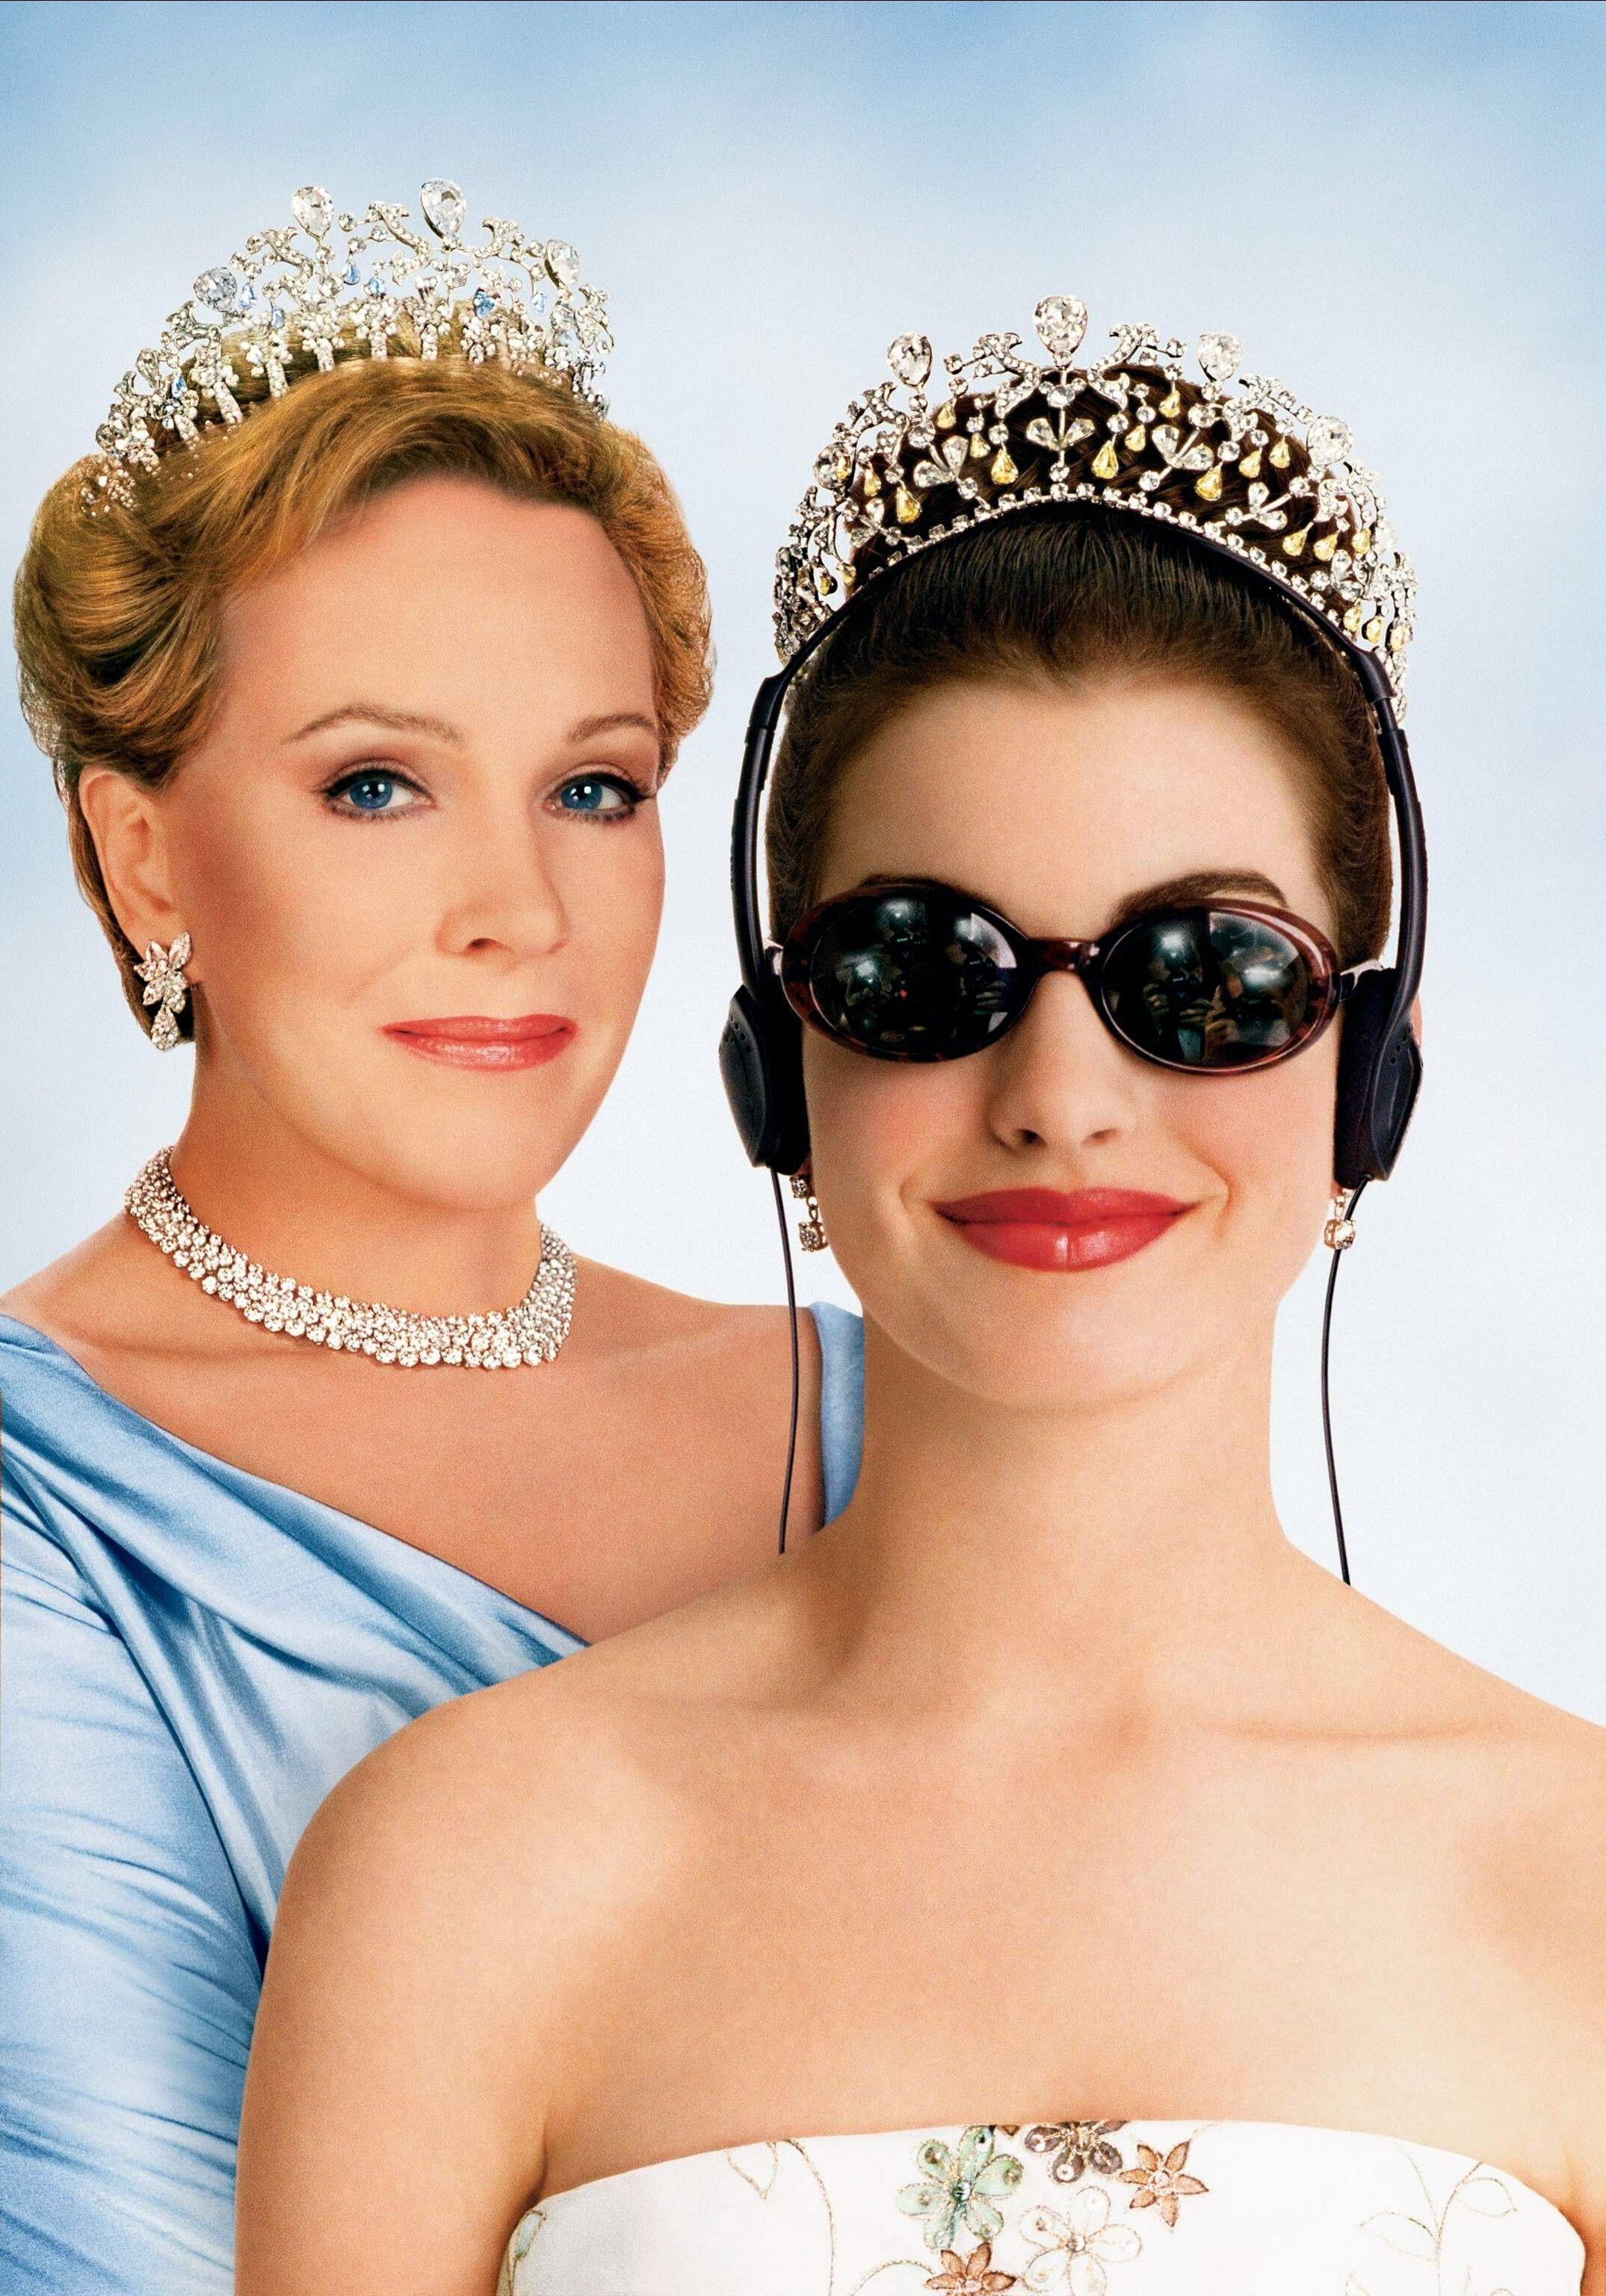 Julie Andrews wearing a crown and Anne